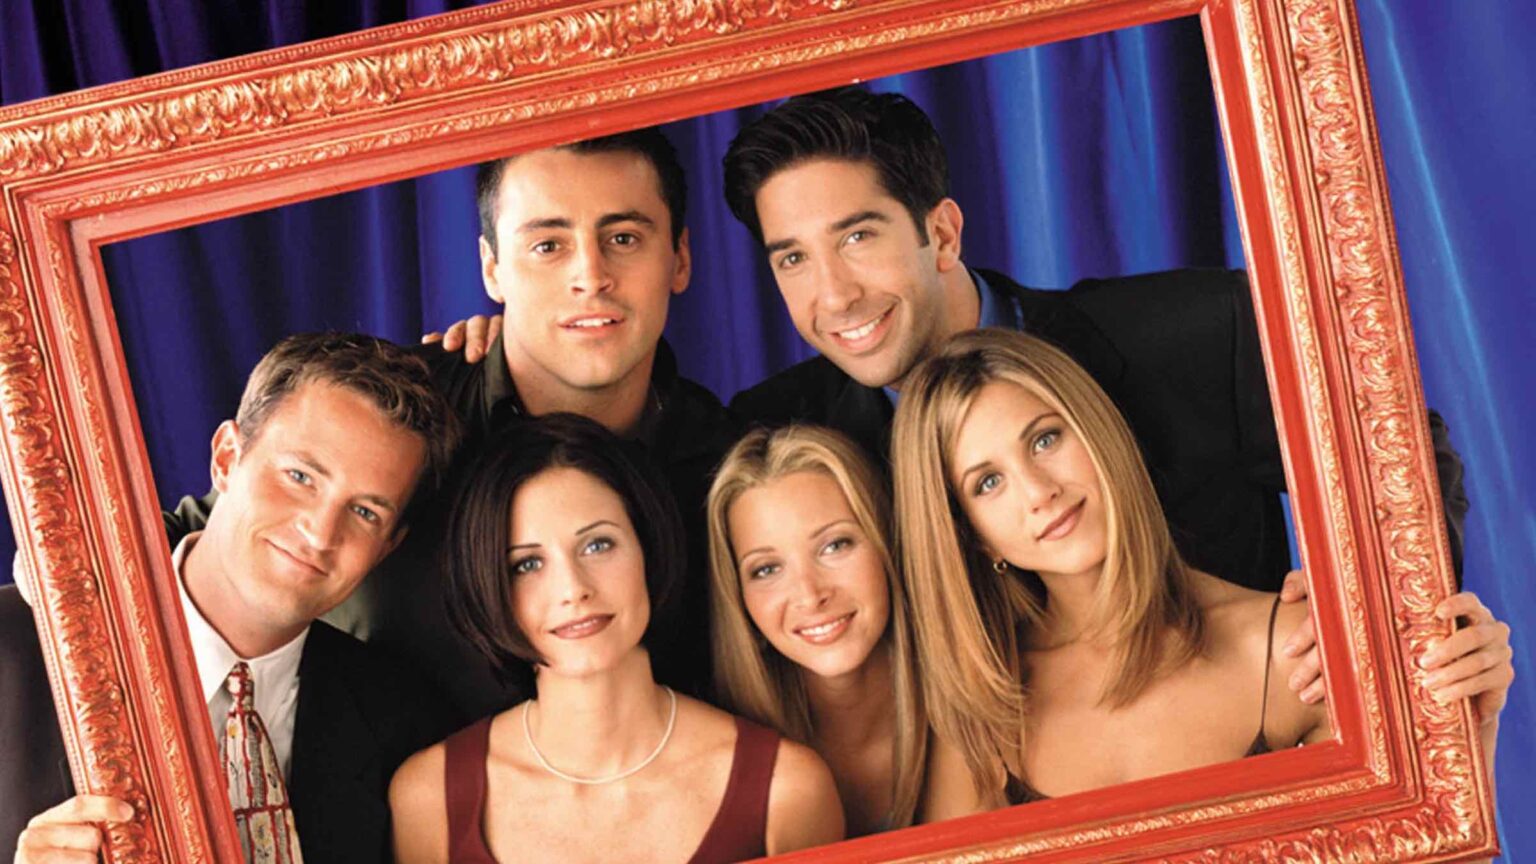 They’ll be there for us in a long-awaited return of the 'Friends' cast. Take this quiz about 'Friends' with your friends and beat the Quiz Master!